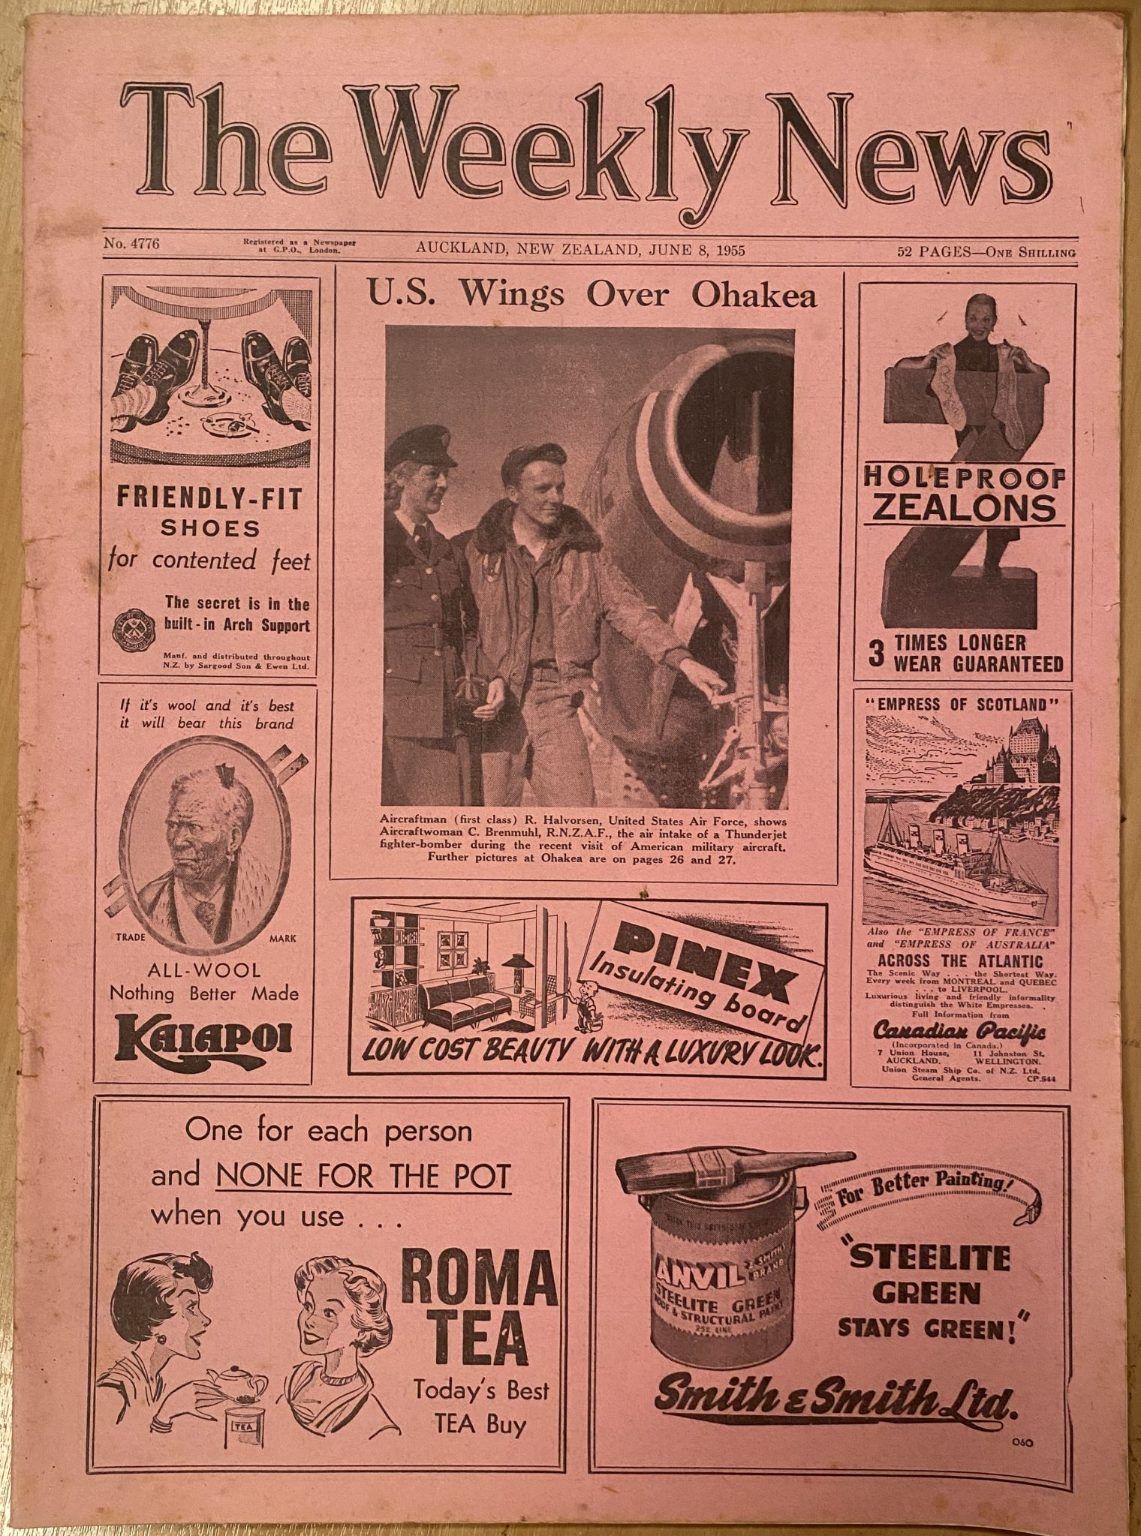 OLD NEWSPAPER: The Weekly News - No. 4776, 8 June 1955